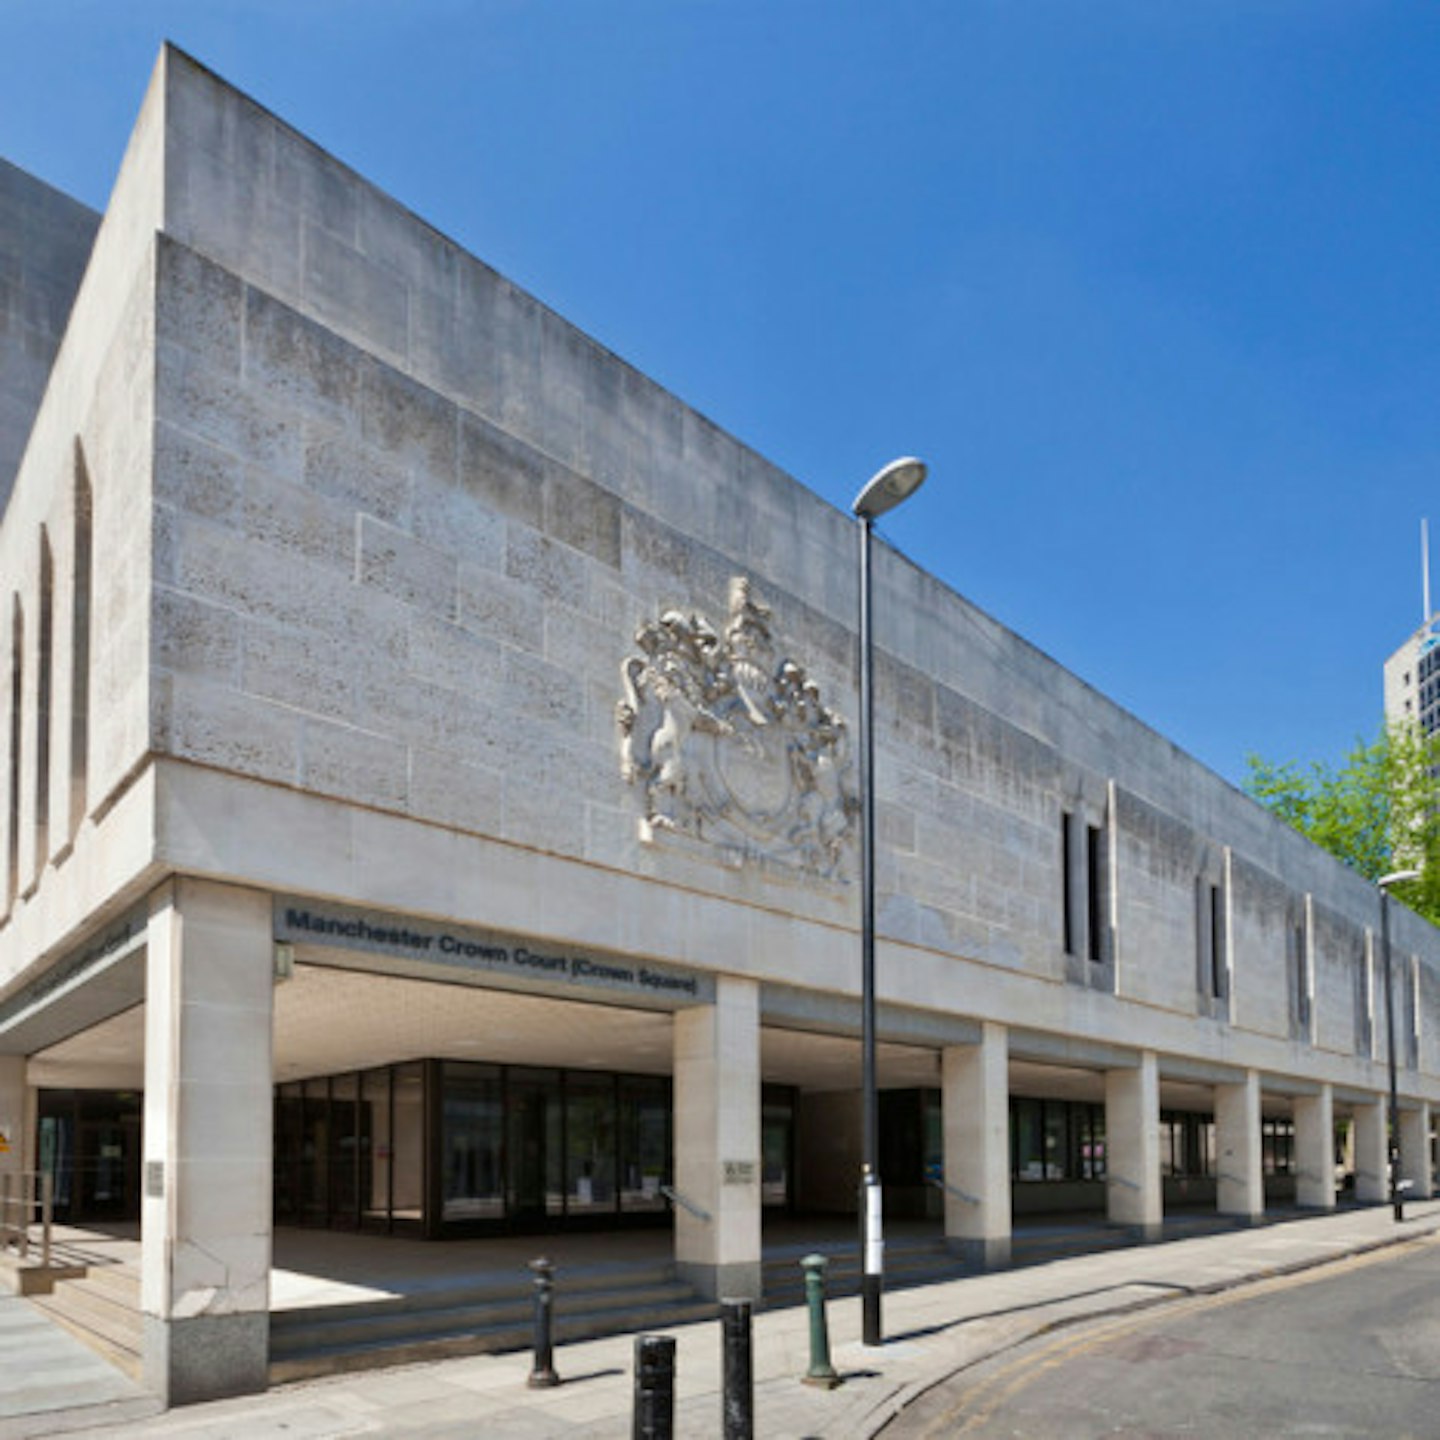 The alleged incident took place at Manchester Crown Court